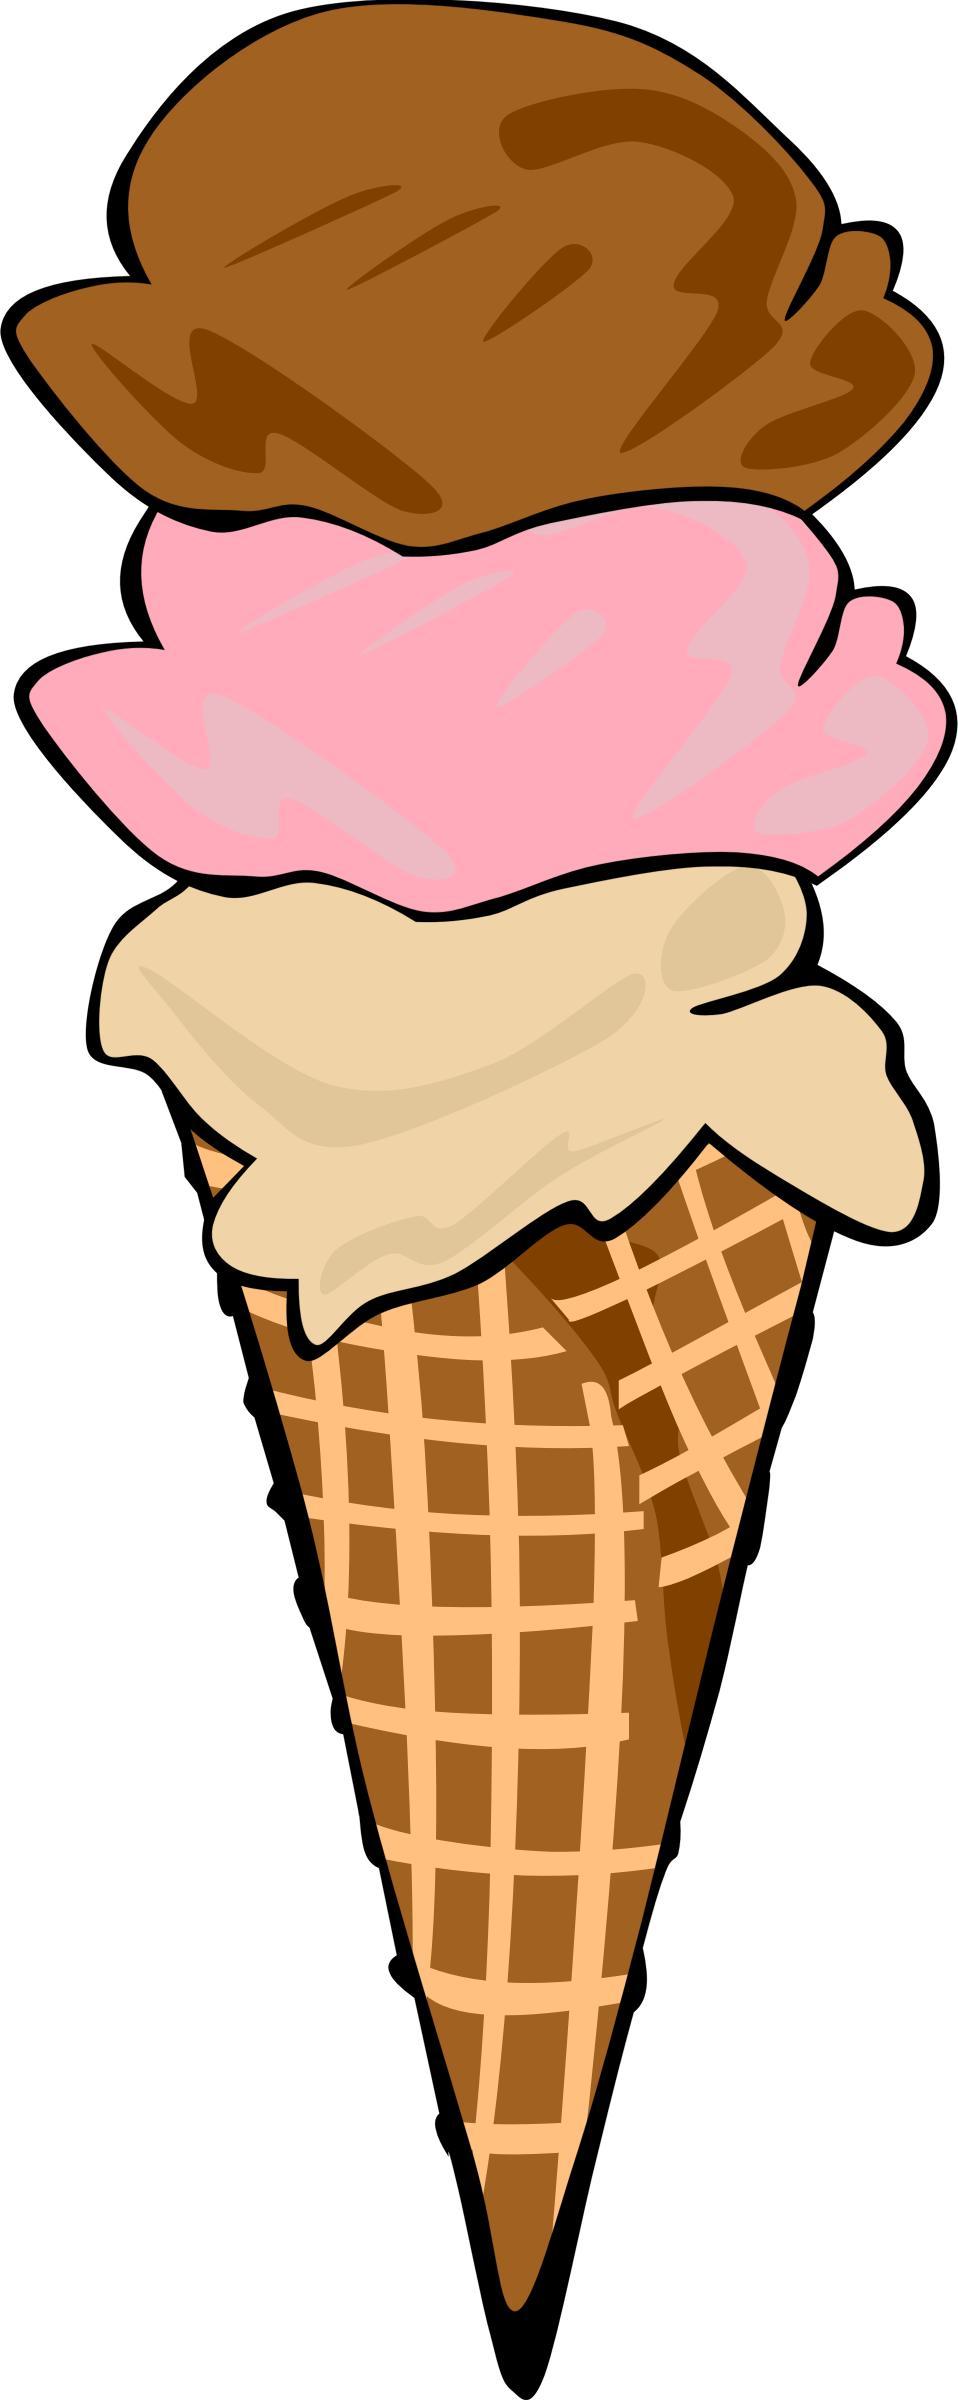 Fast Food, Desserts, Ice Cream Cones, Waffle, Triple png transparent